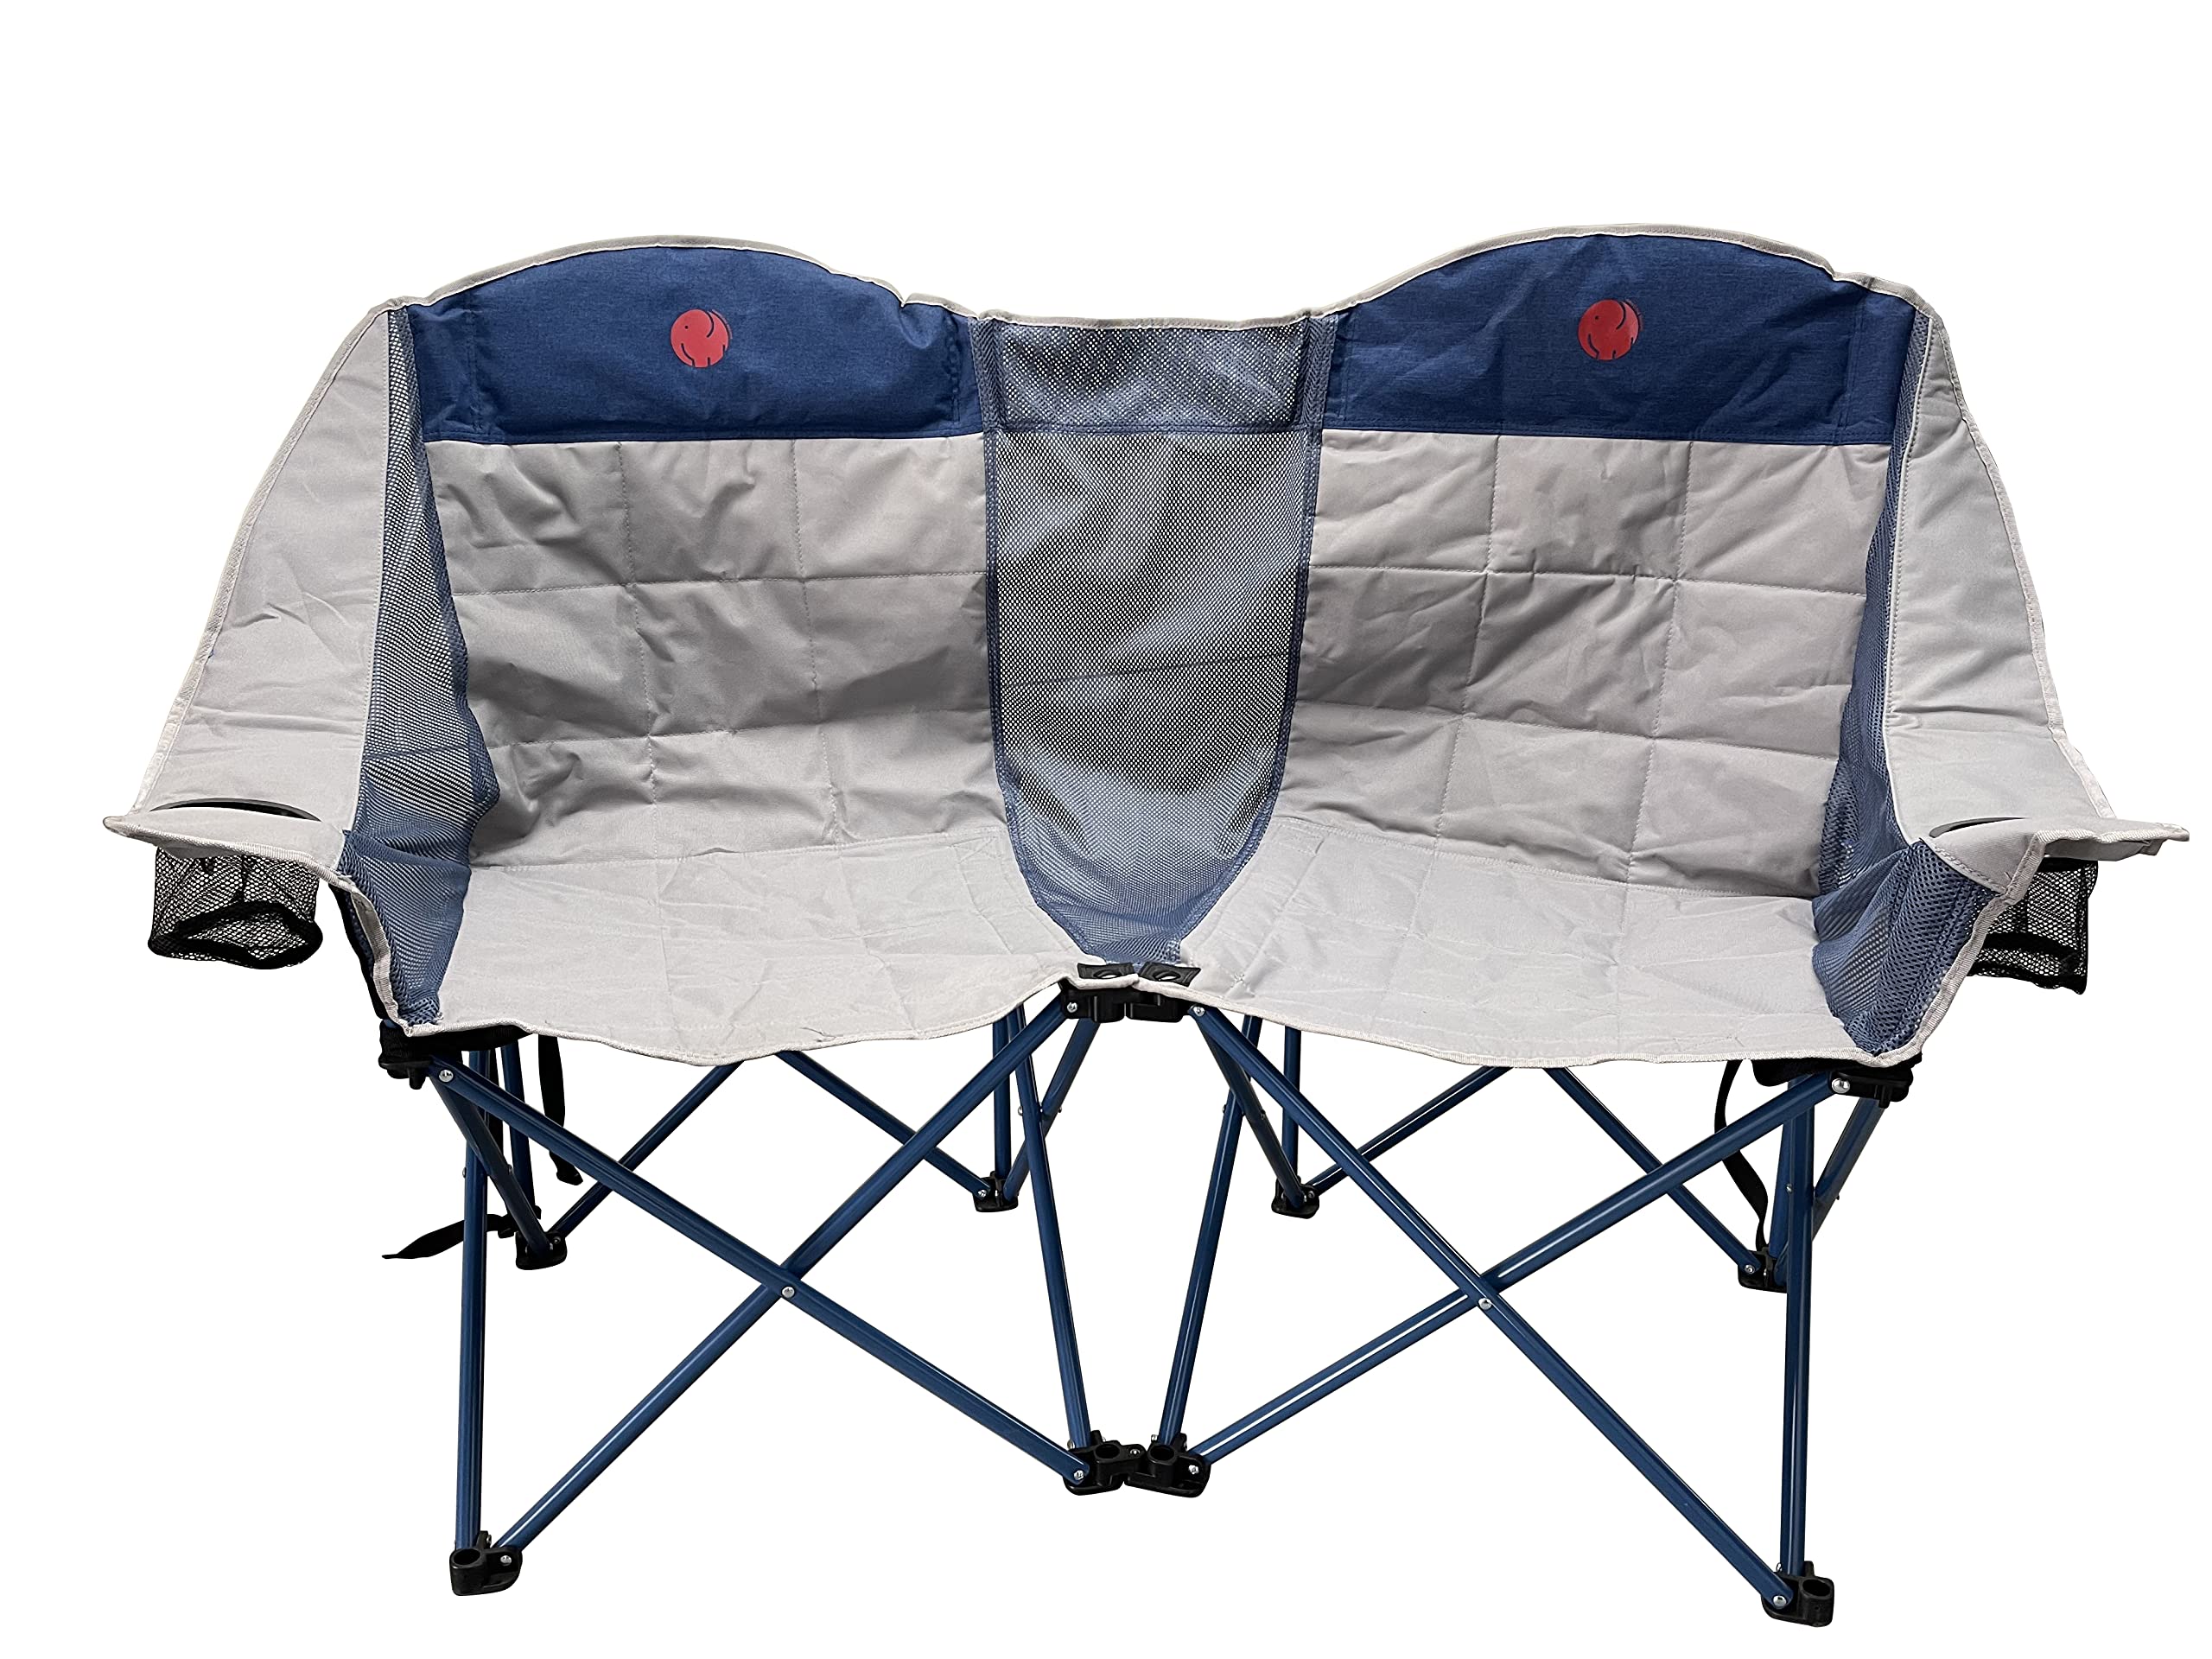 OmniCore Designs Heavy Duty Oversized Outdoor Folding Loveseat Camp Chair Collection (Single, Double & Triple Seating Capacity)